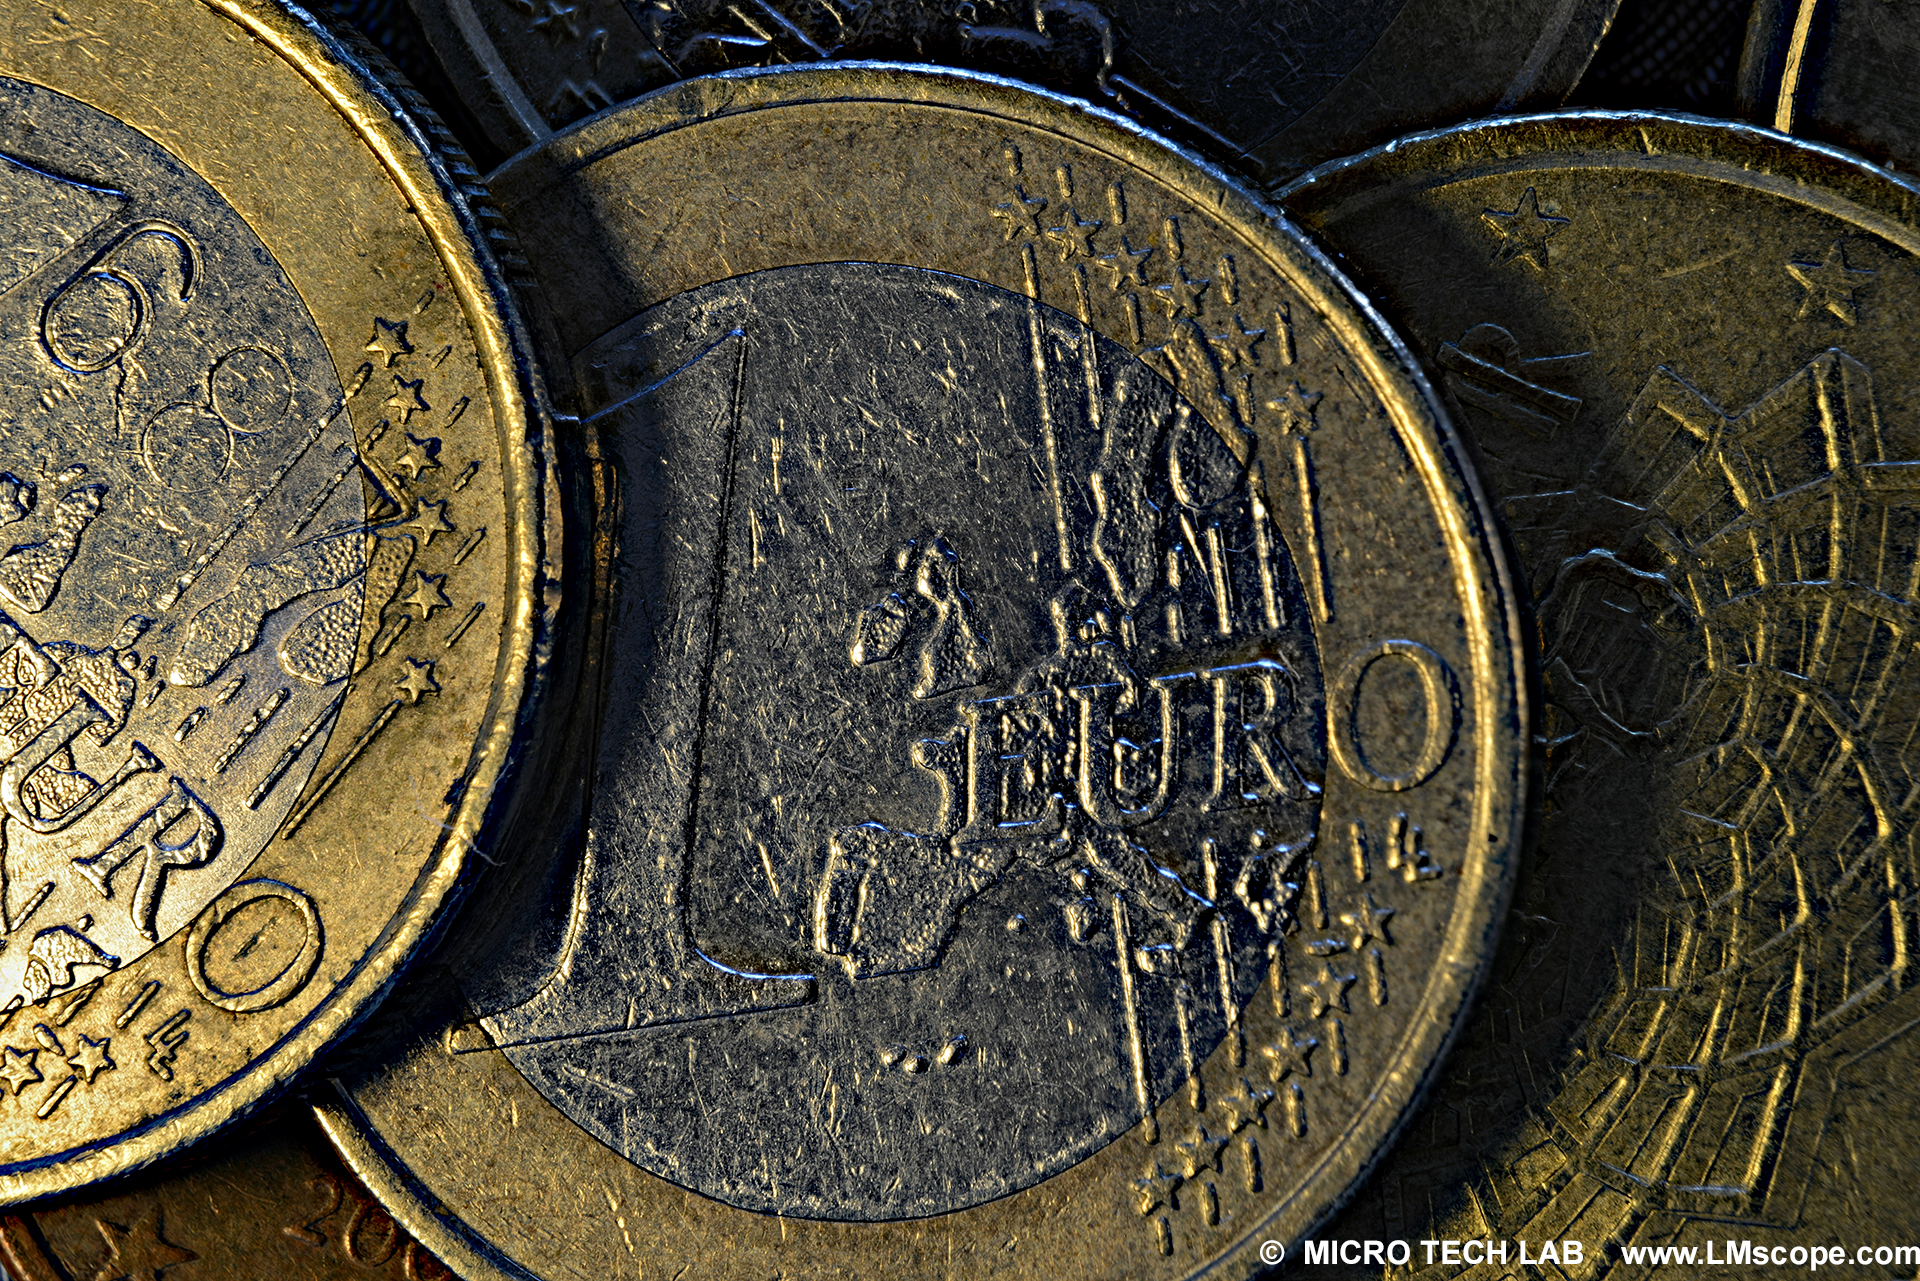 Euro coins with mysterious press cut